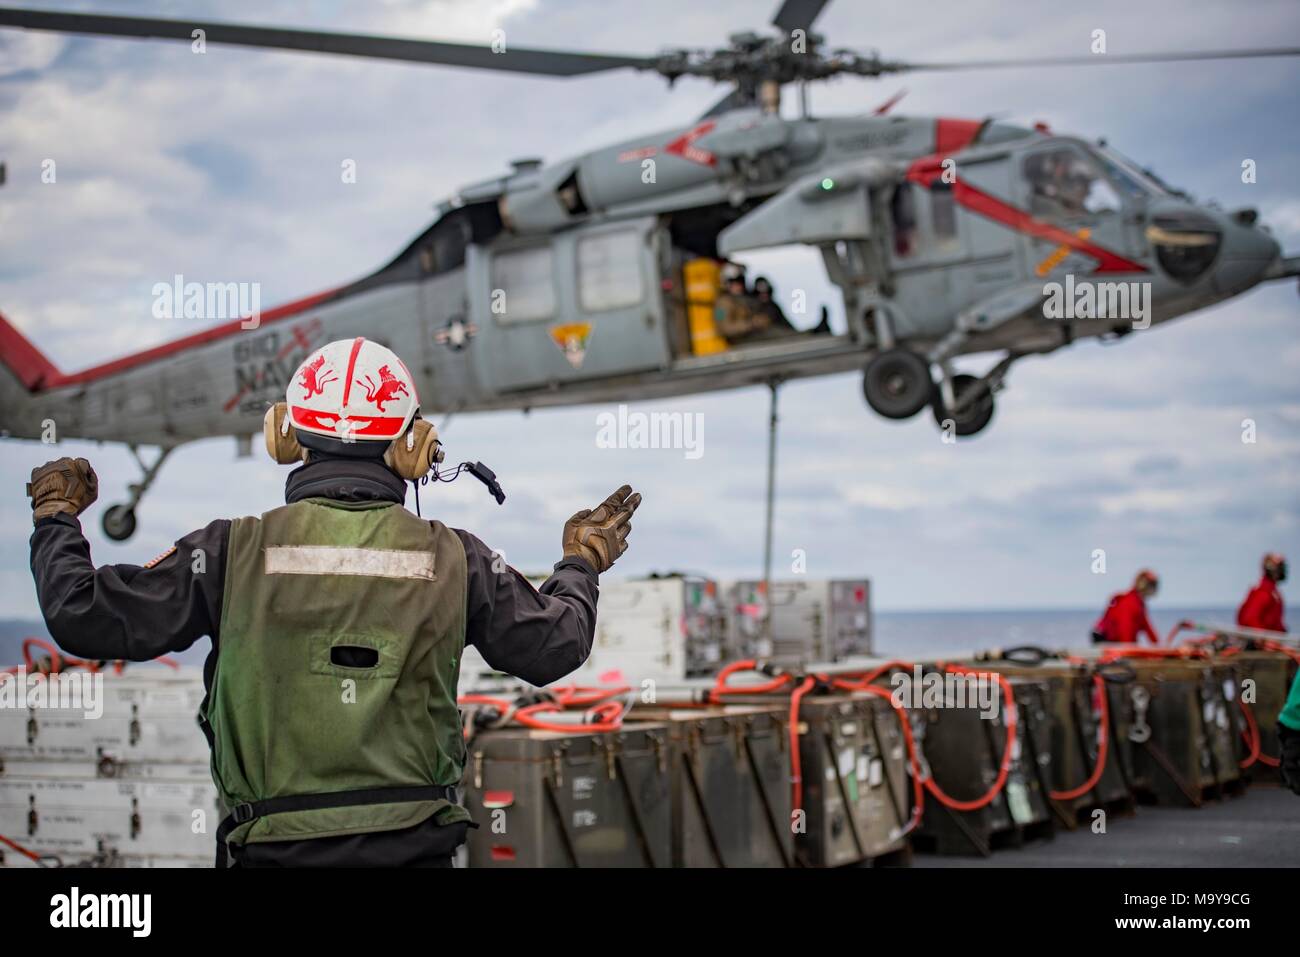 180326-N-SO730-0099 (March 26, 2018) Aviation Electrician's Mate 3rd Class Jacob Howell, from Sarasota, Florida, assigned to Helicopter Sea Combat Squadron 9, directs one of his squadron's MH-60S Sea Hawk helicopters during an ammunition offload aboard the aircraft carrier USS George H.W. Bush (CVN 77). The ship is underway conducting sustainment exercises to maintain carrier readiness. (U.S. Navy photo by Mass Communication Specialist 3rd Class Joe Boggio) Stock Photo